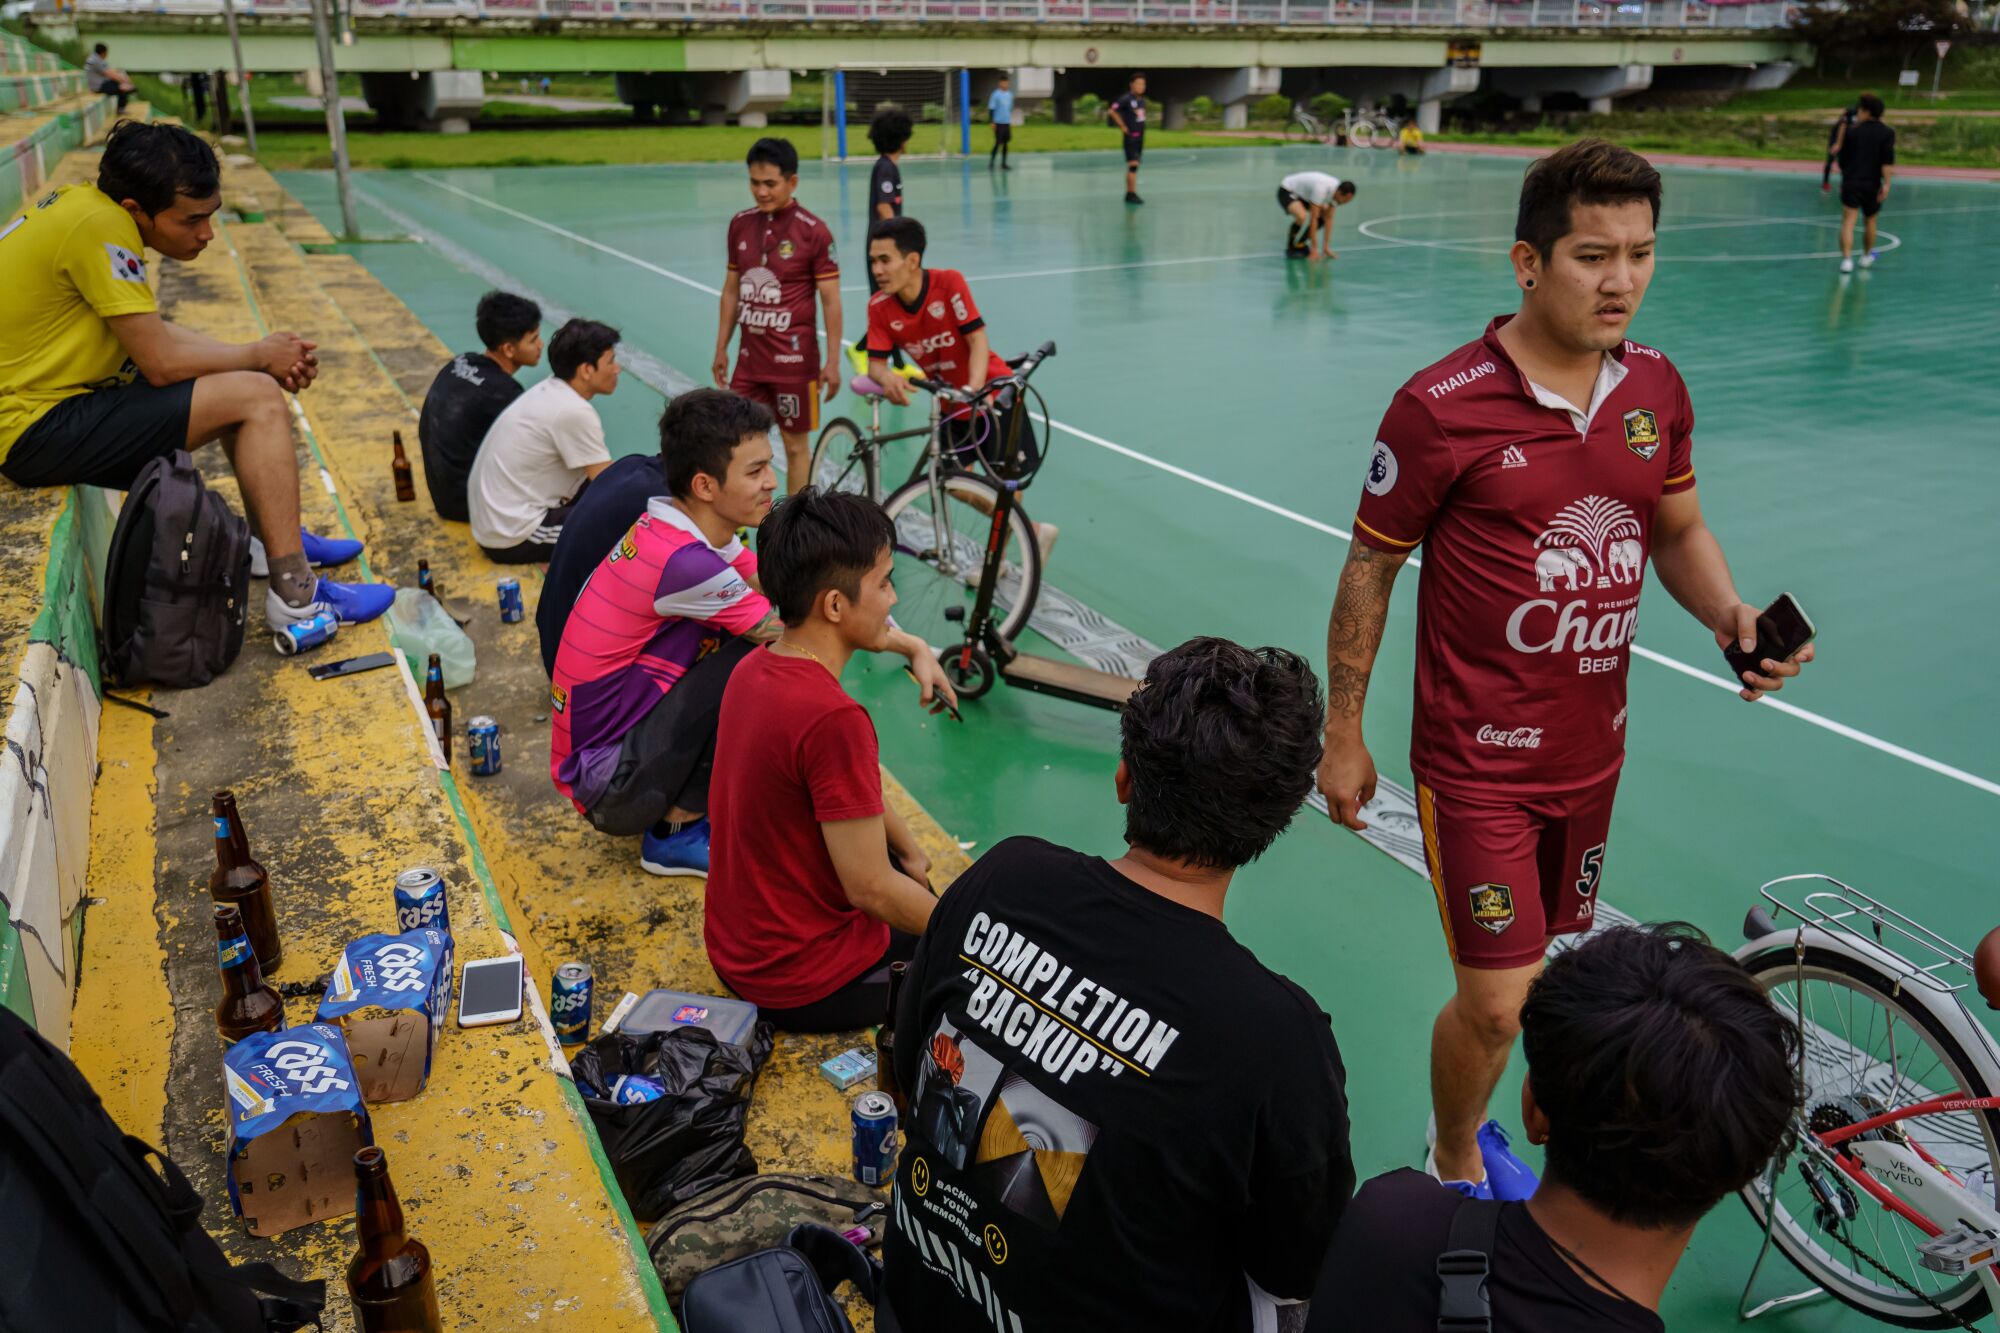 Thai nationals spend their weekends playing soccer in Jeongeup.